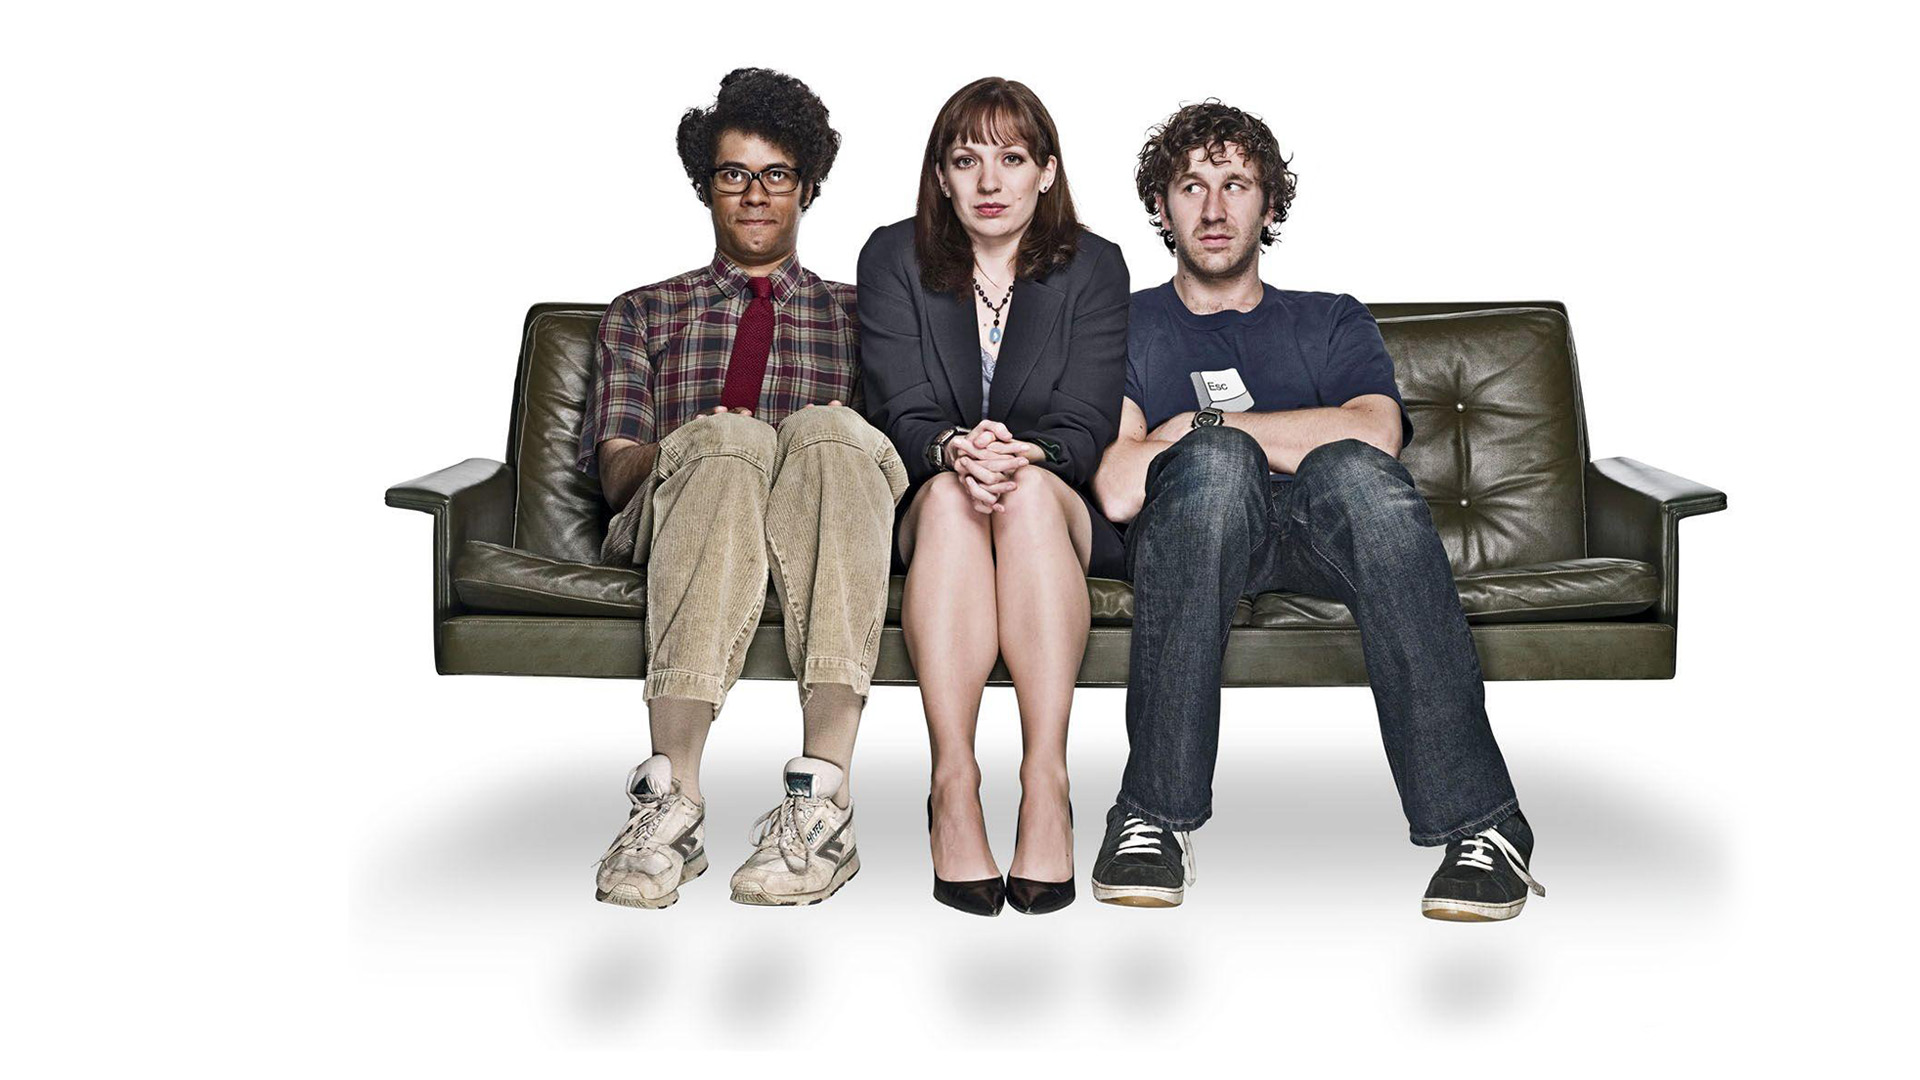 High Resolution Wallpaper | The IT Crowd 1920x1080 px